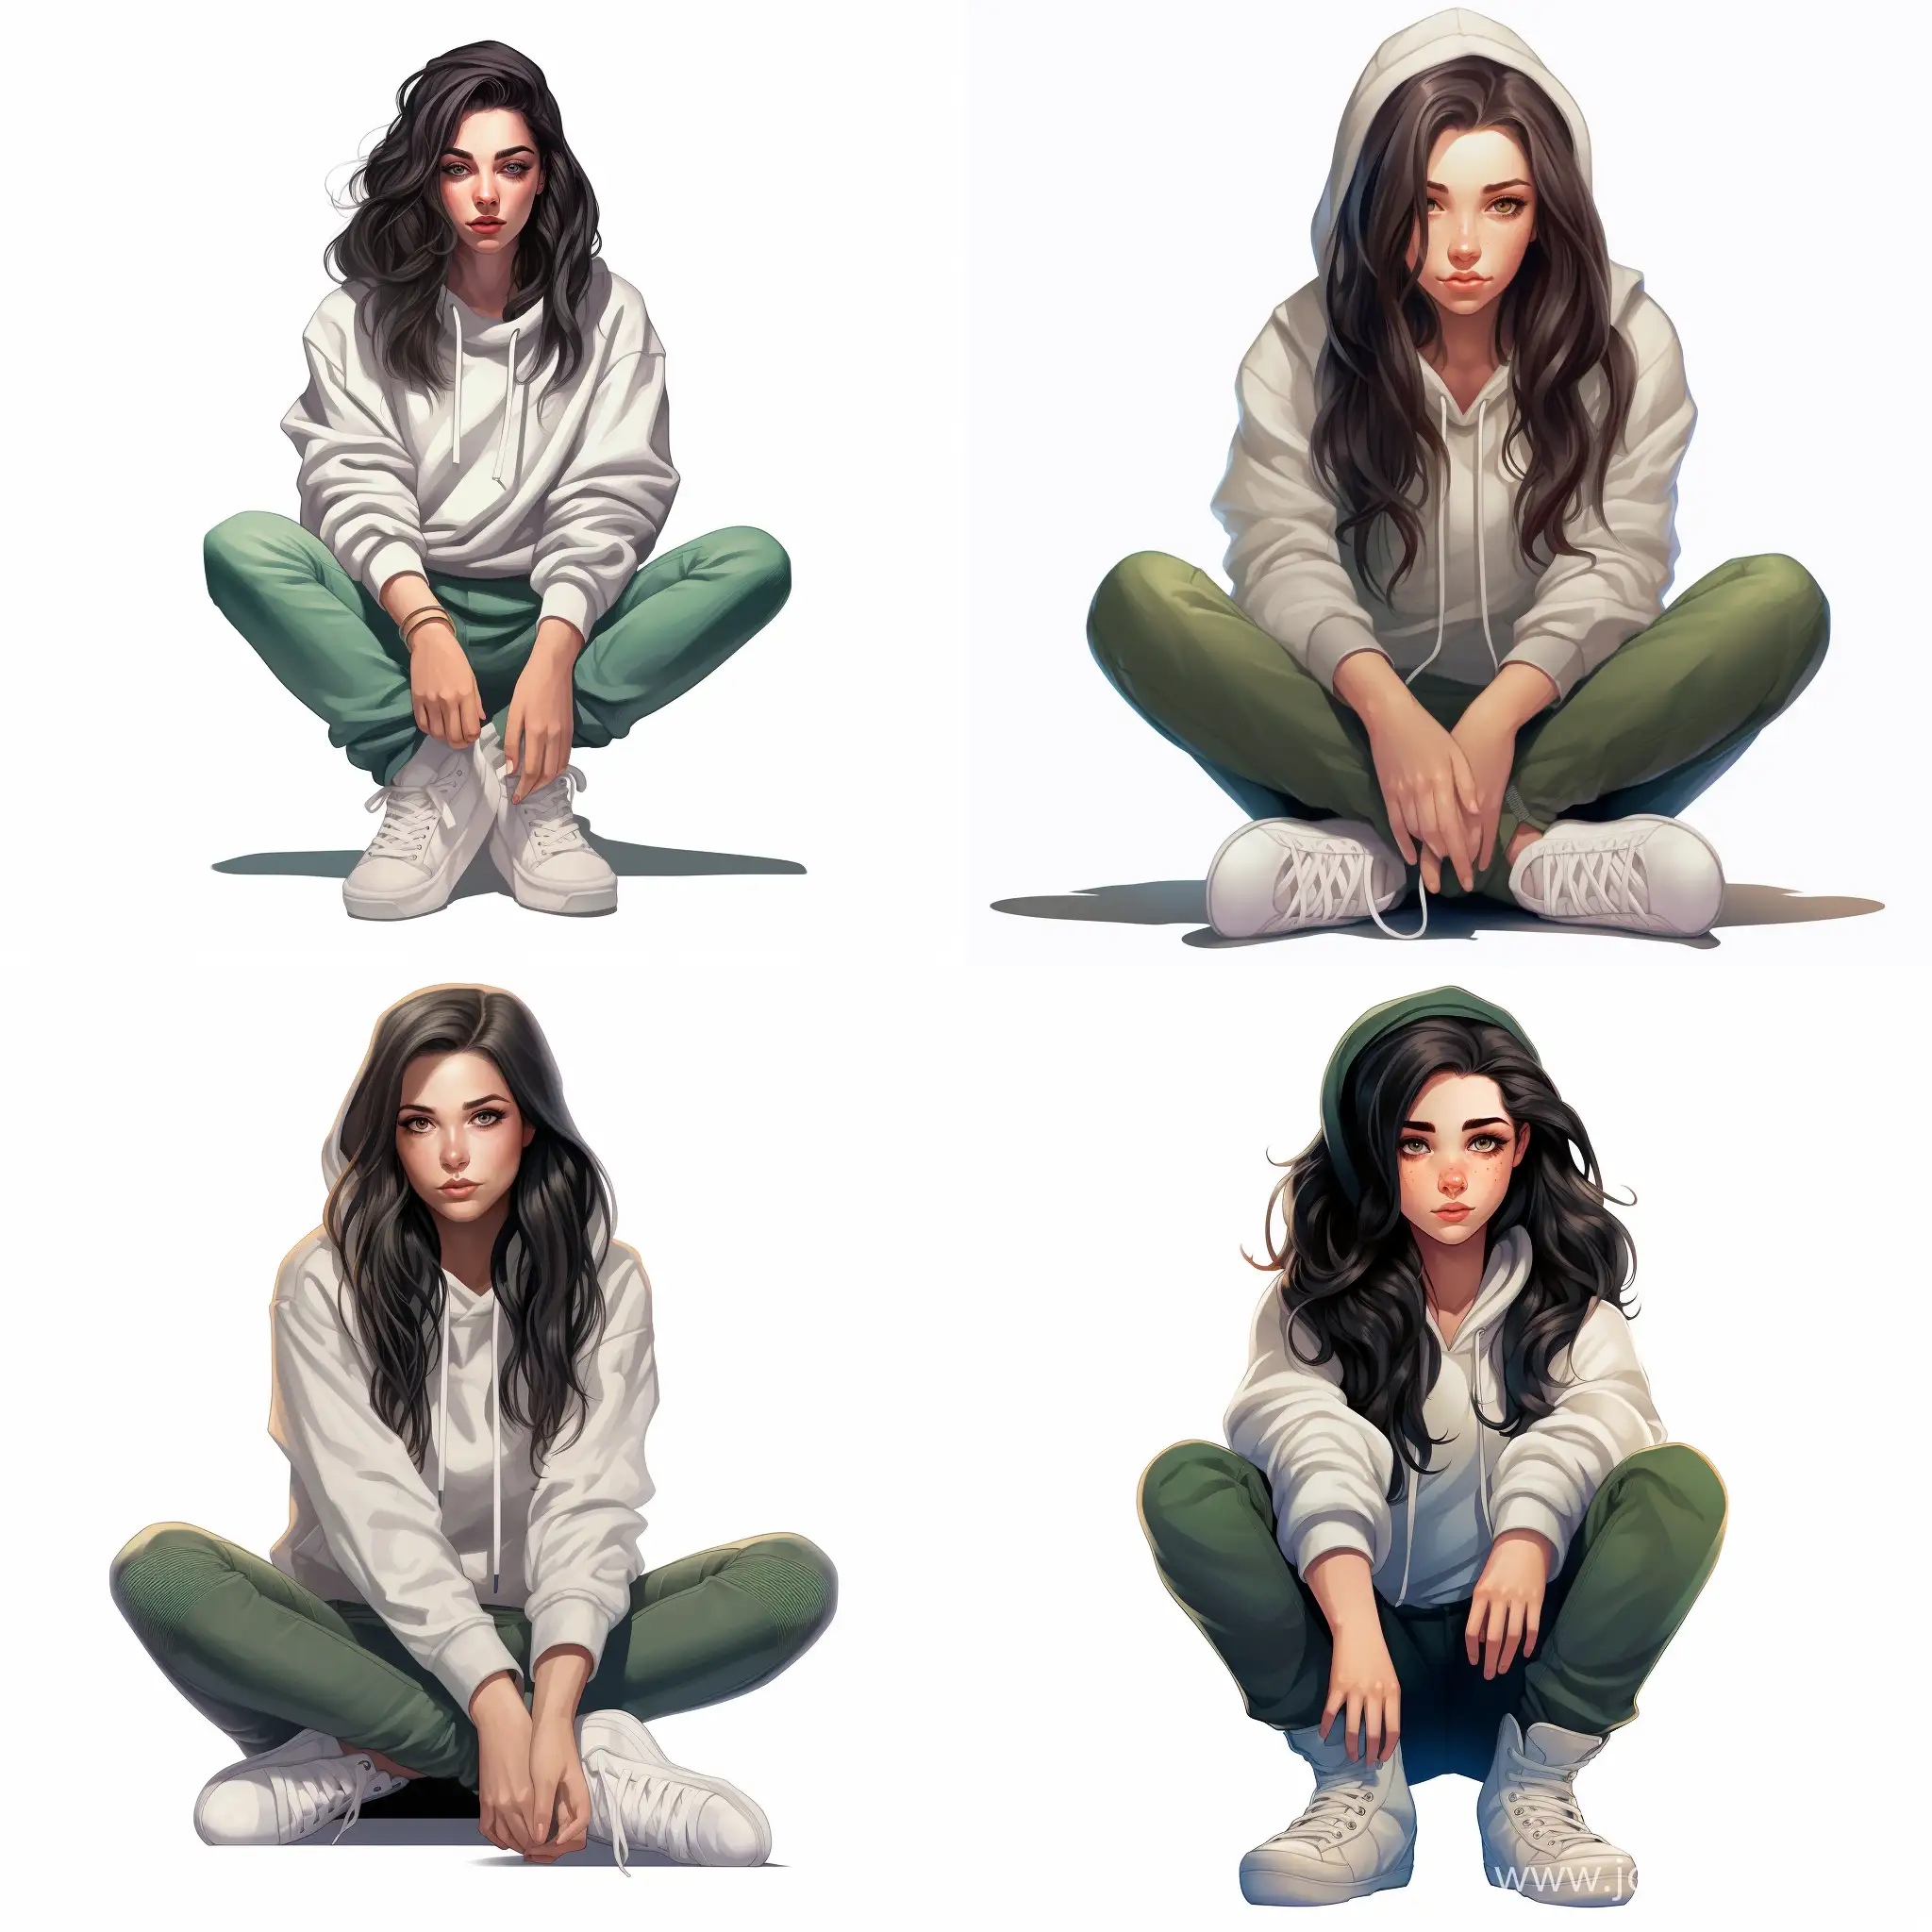 Beautiful girl, straight dark hair, expressive green eyes, snow-white skin, teenager, in hoodie and jeans, sneakers, modern, relaxed, high quality, high detail, cartoon art